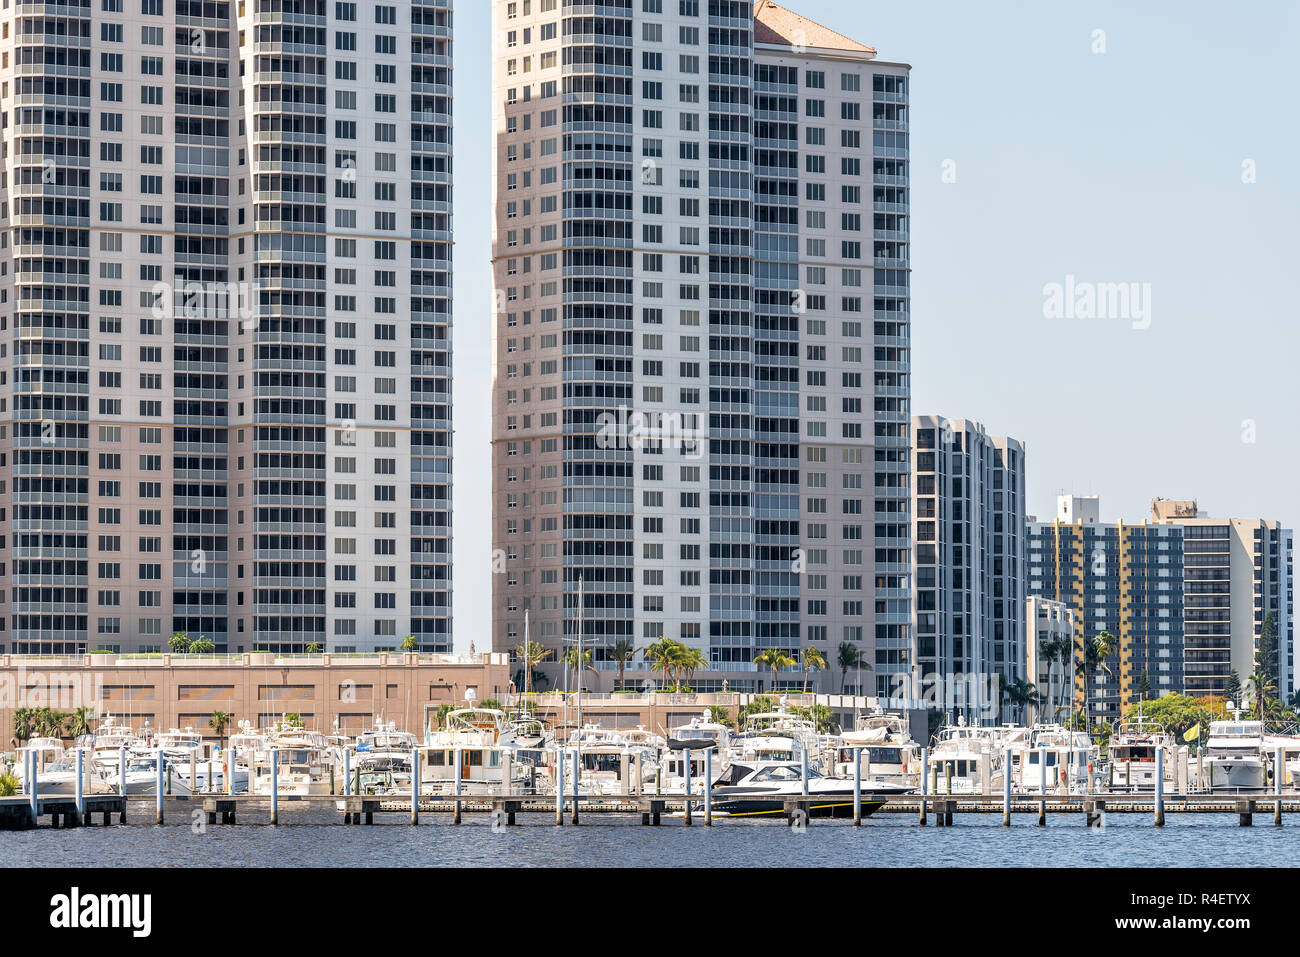 Fort Myers, USA - April 29, 2018: Boats in marina harbor dock on Caloosahatchee River during sunny day in Florida gulf of mexico coast, apartment cond Stock Photo